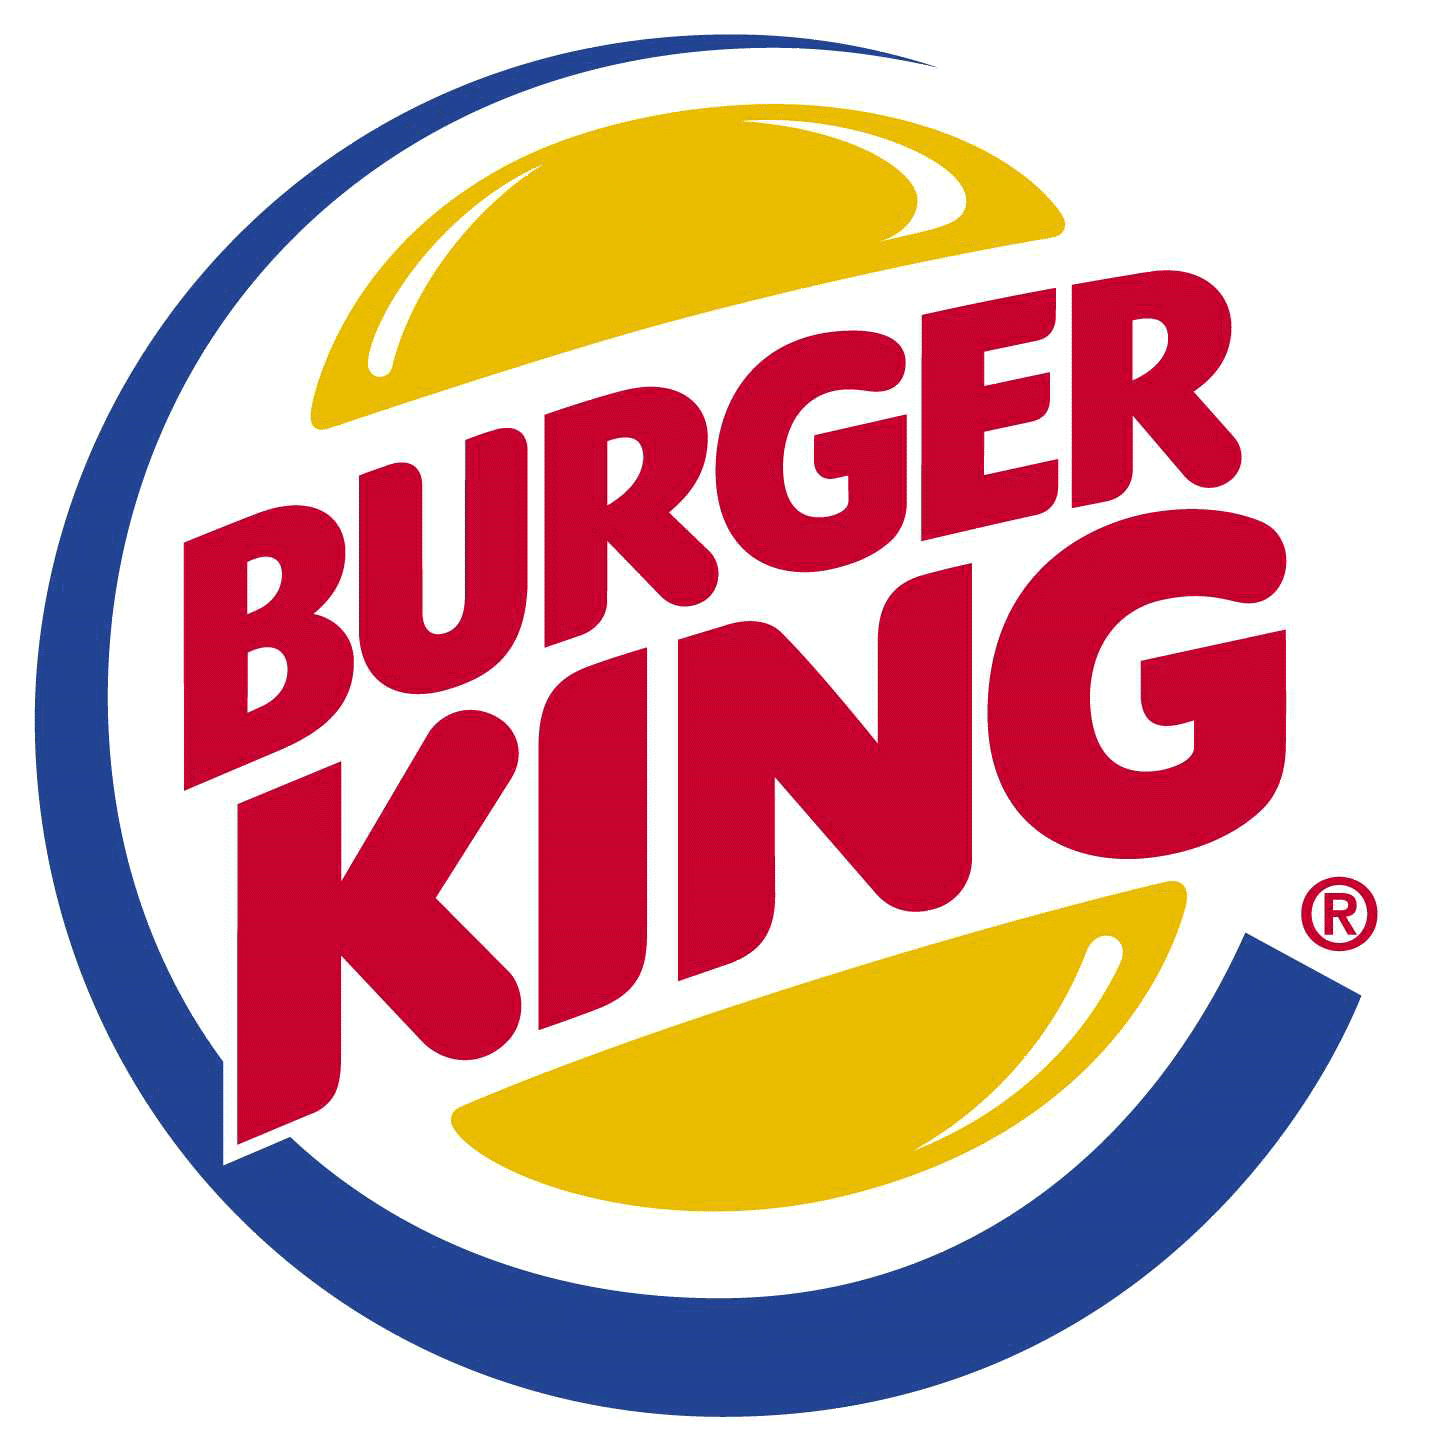 Resturants Red Hamburger Logo - BURGER KING®, often abbreviated as BK, is a global chain of ...